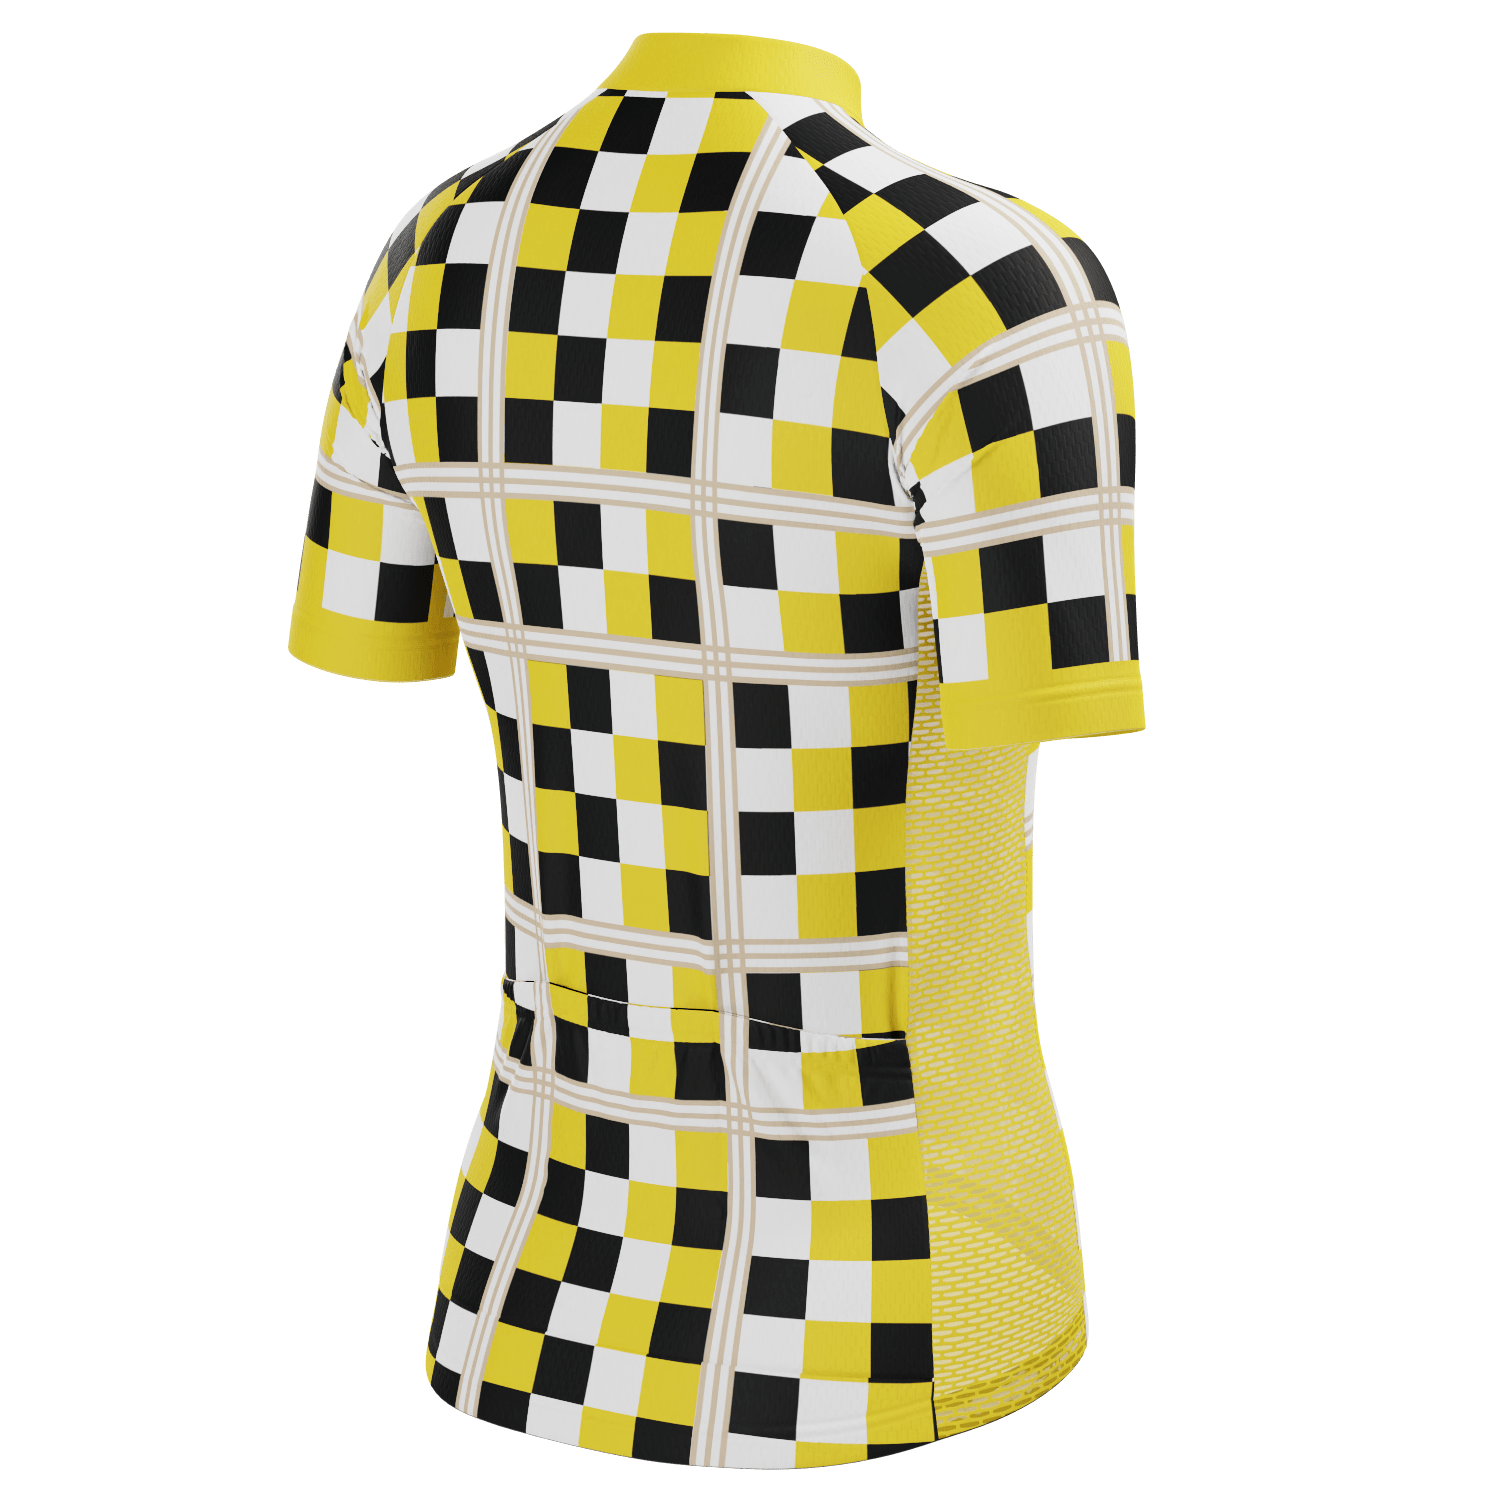 Women's Checkered Plaid Short Sleeve Cycling Jersey